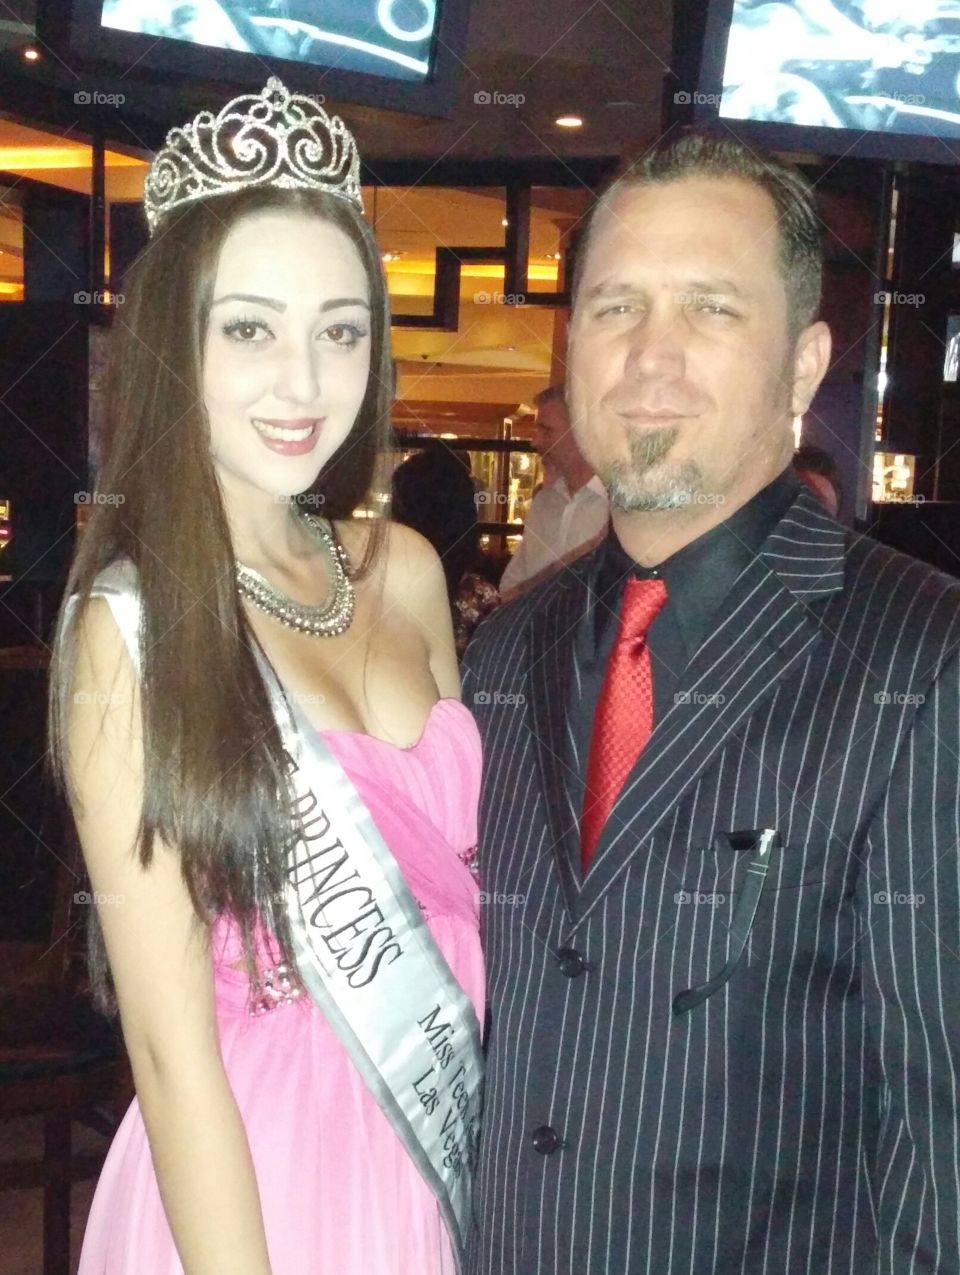 miss Asian event at hard rock in Vegas